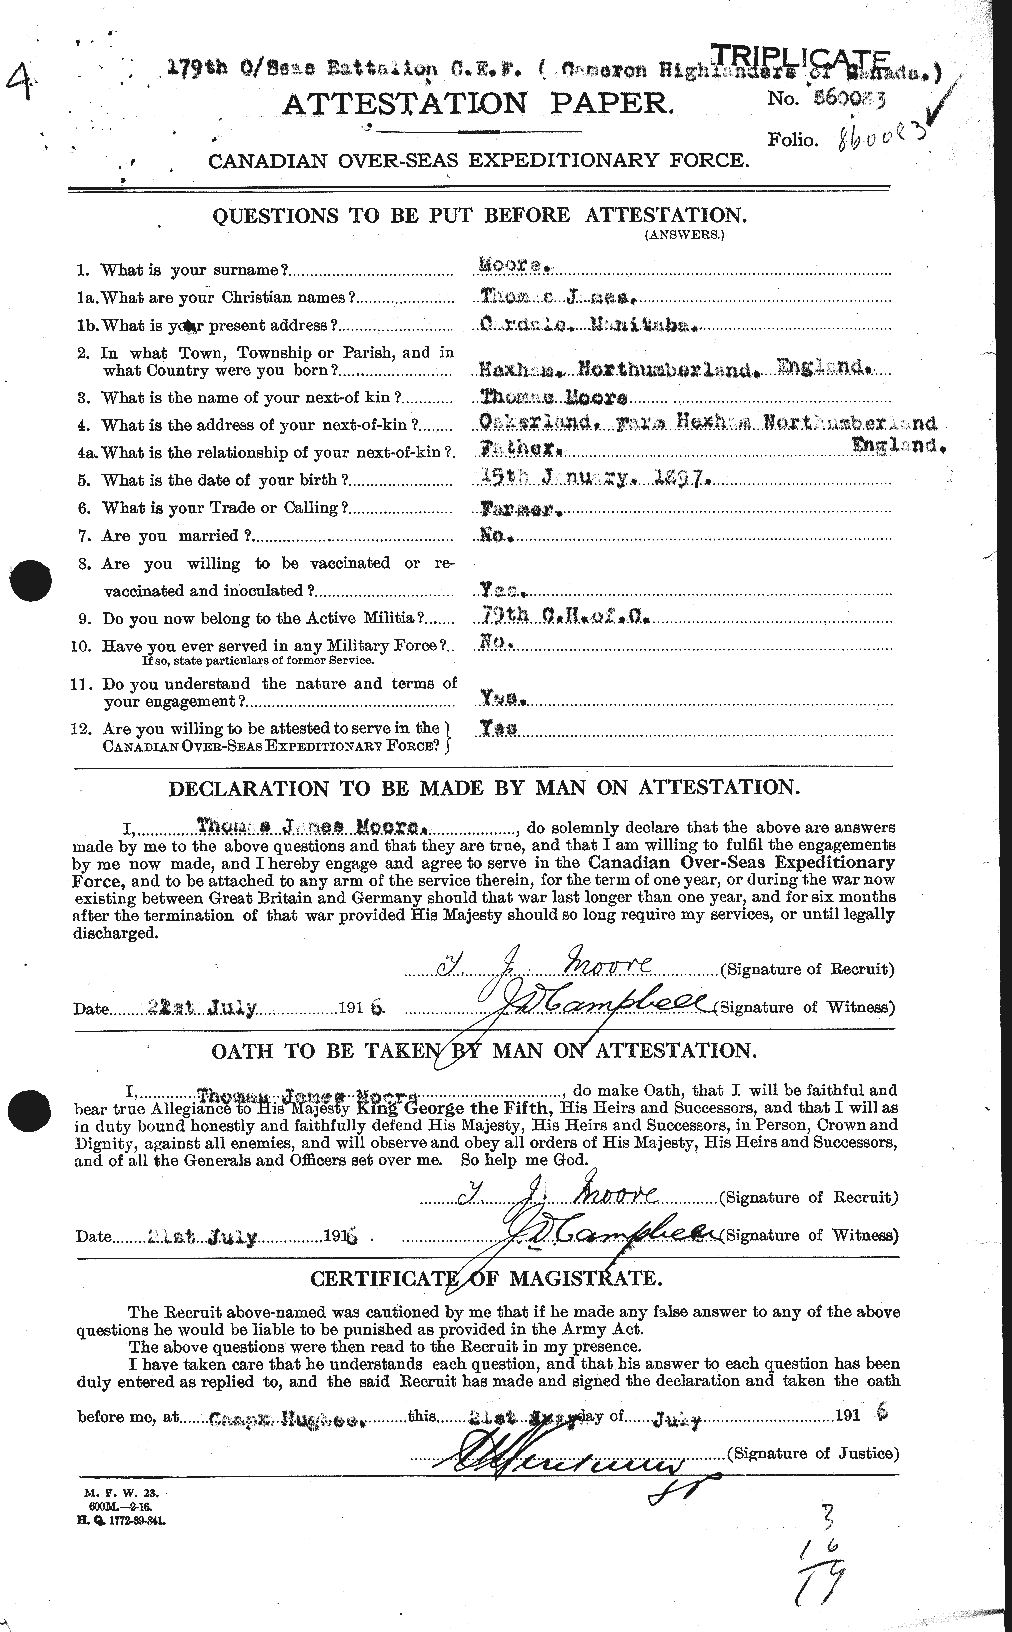 Personnel Records of the First World War - CEF 505657a